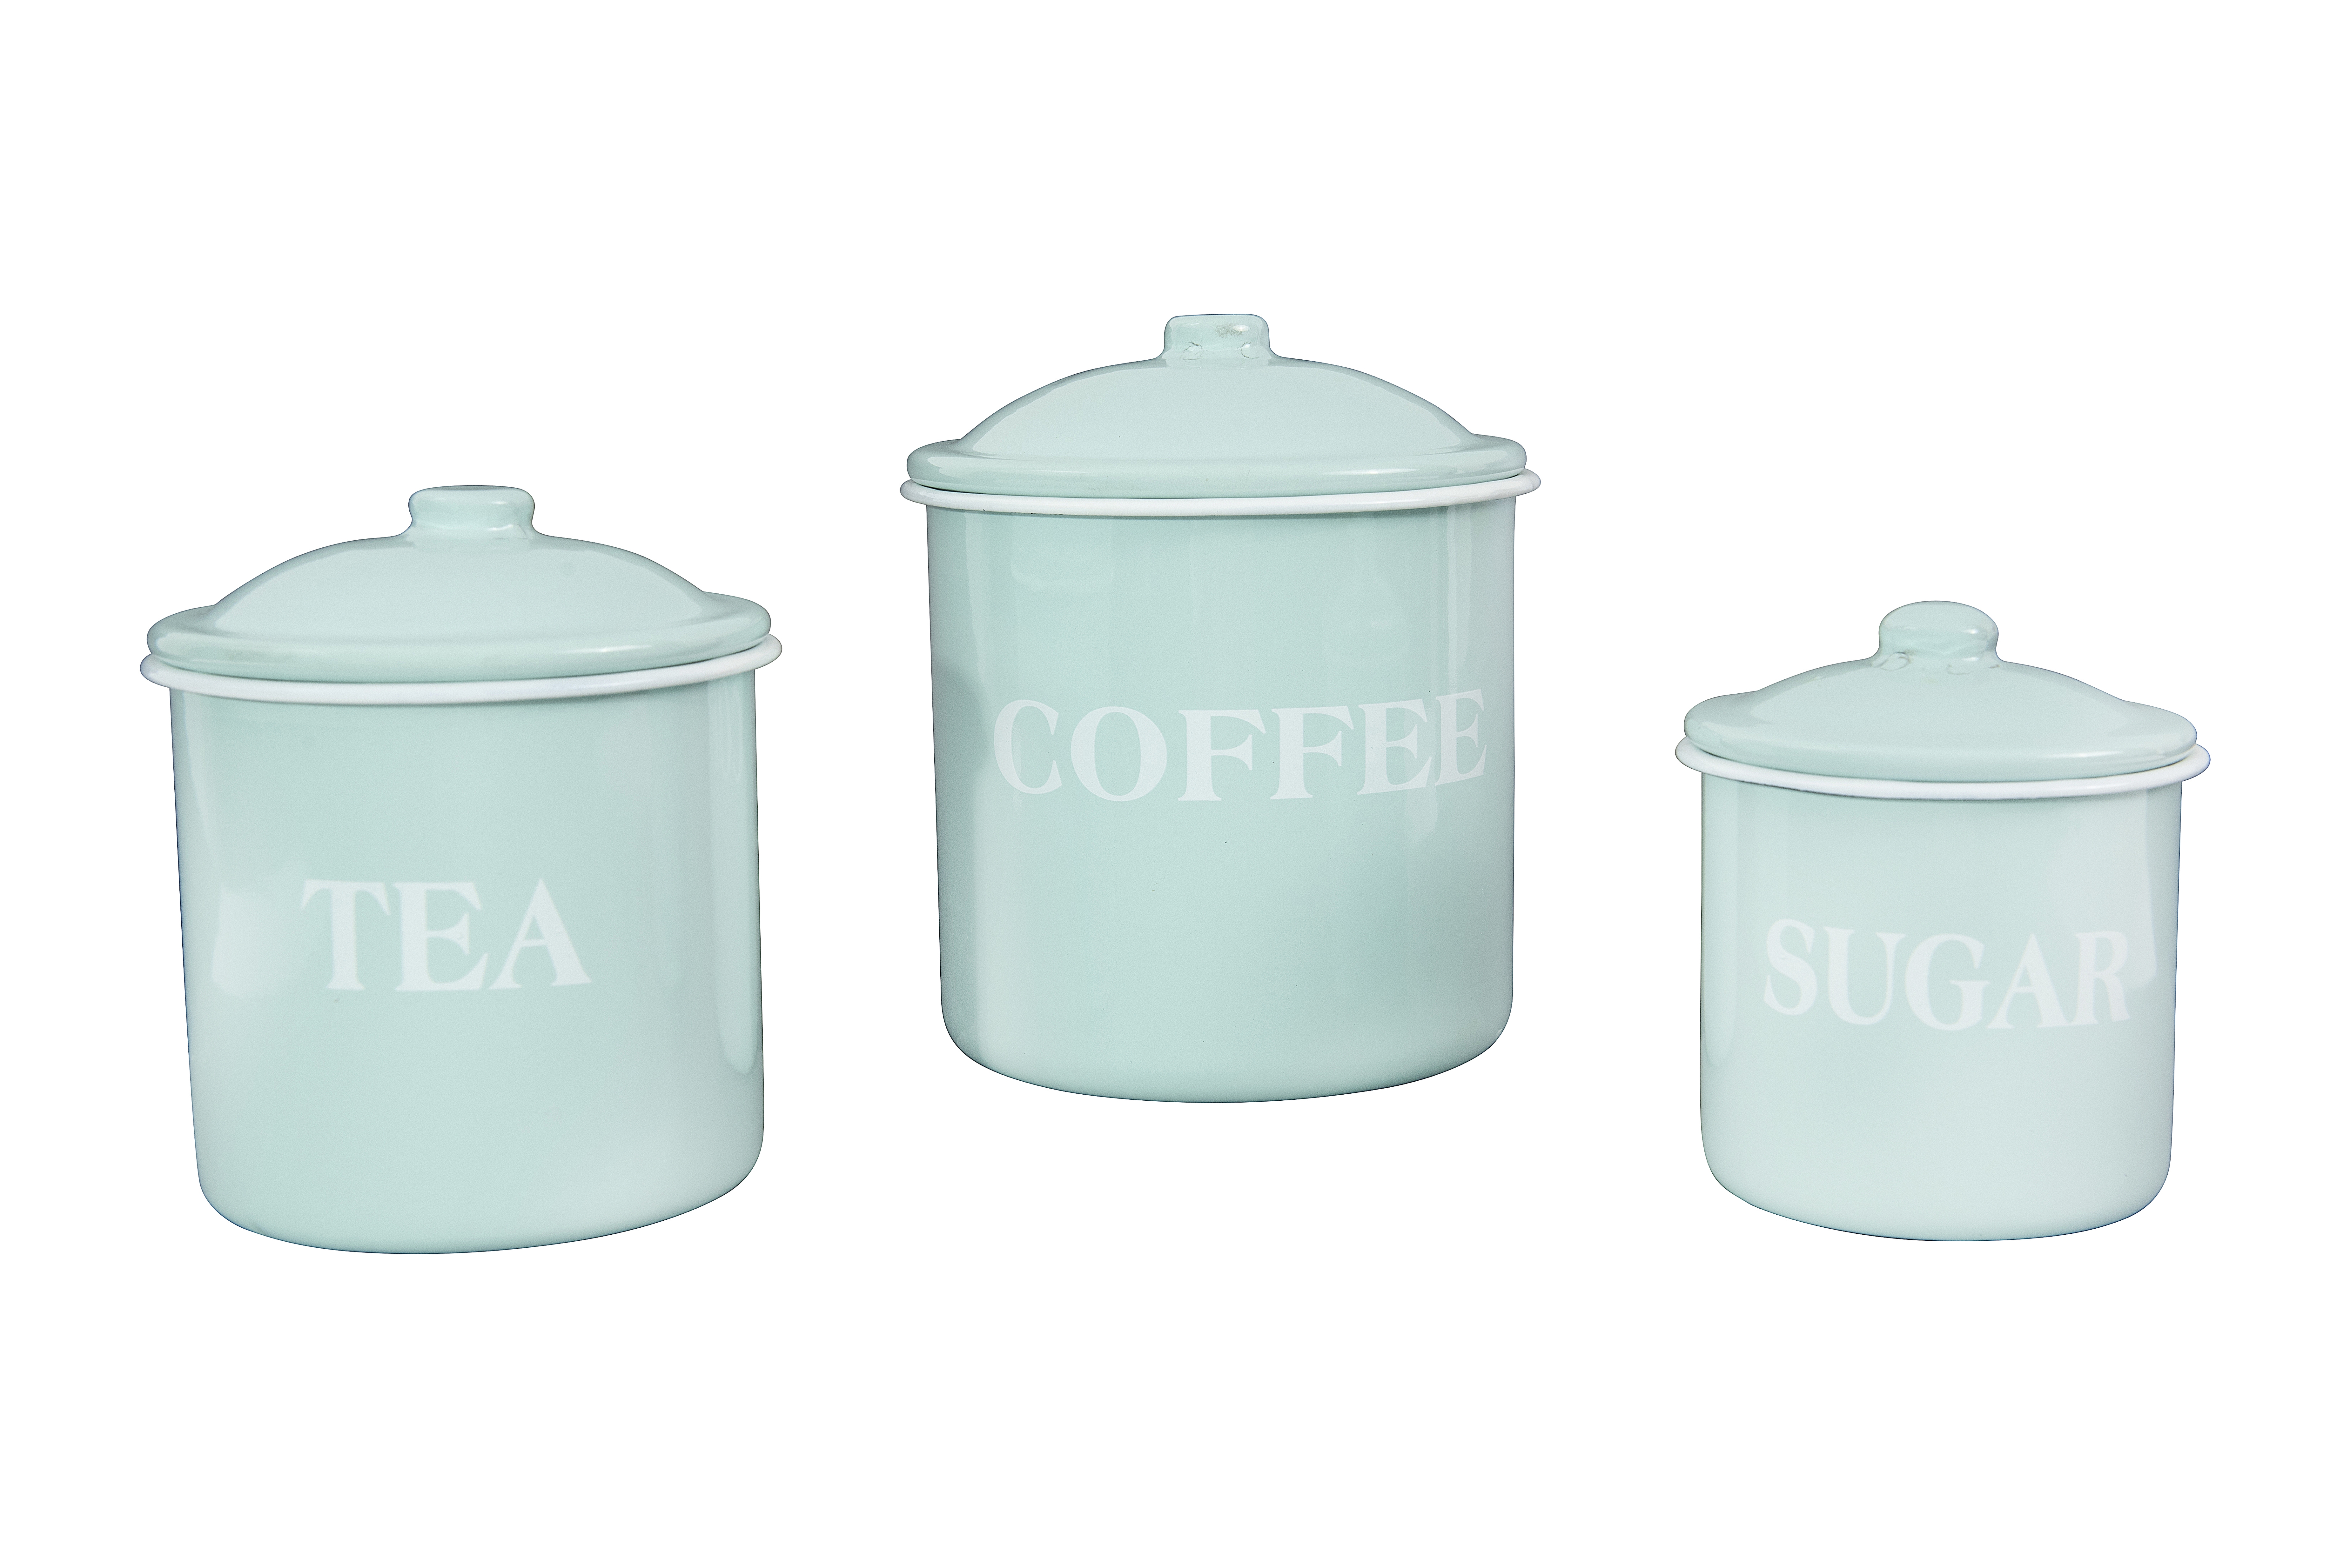 Metal Containers with Lids, "Coffee", "Tea", "Sugar" (Set of 3 Sizes/Designs) - Nomad Home